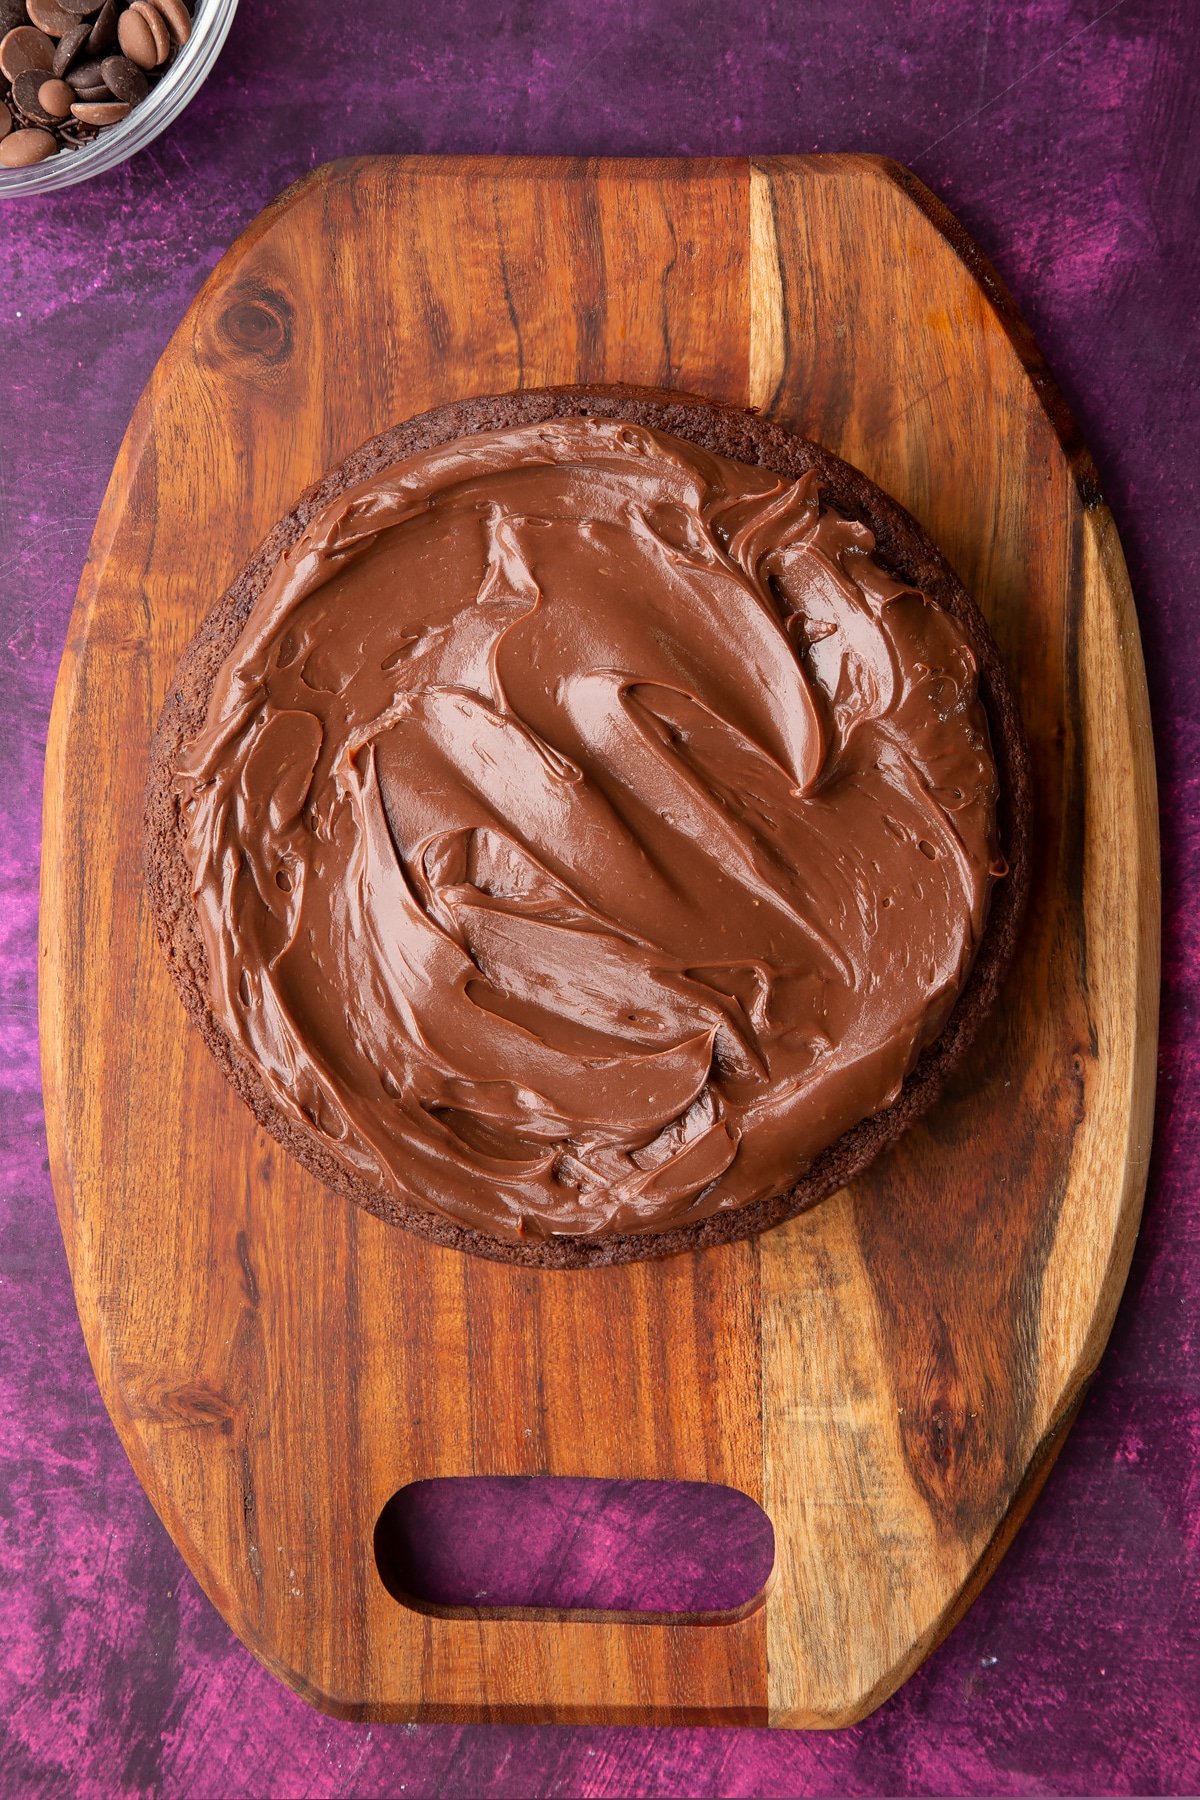 a large round chocolate sponge cake on a wooden chopping board topped with chocolate fudge and spread evenly.